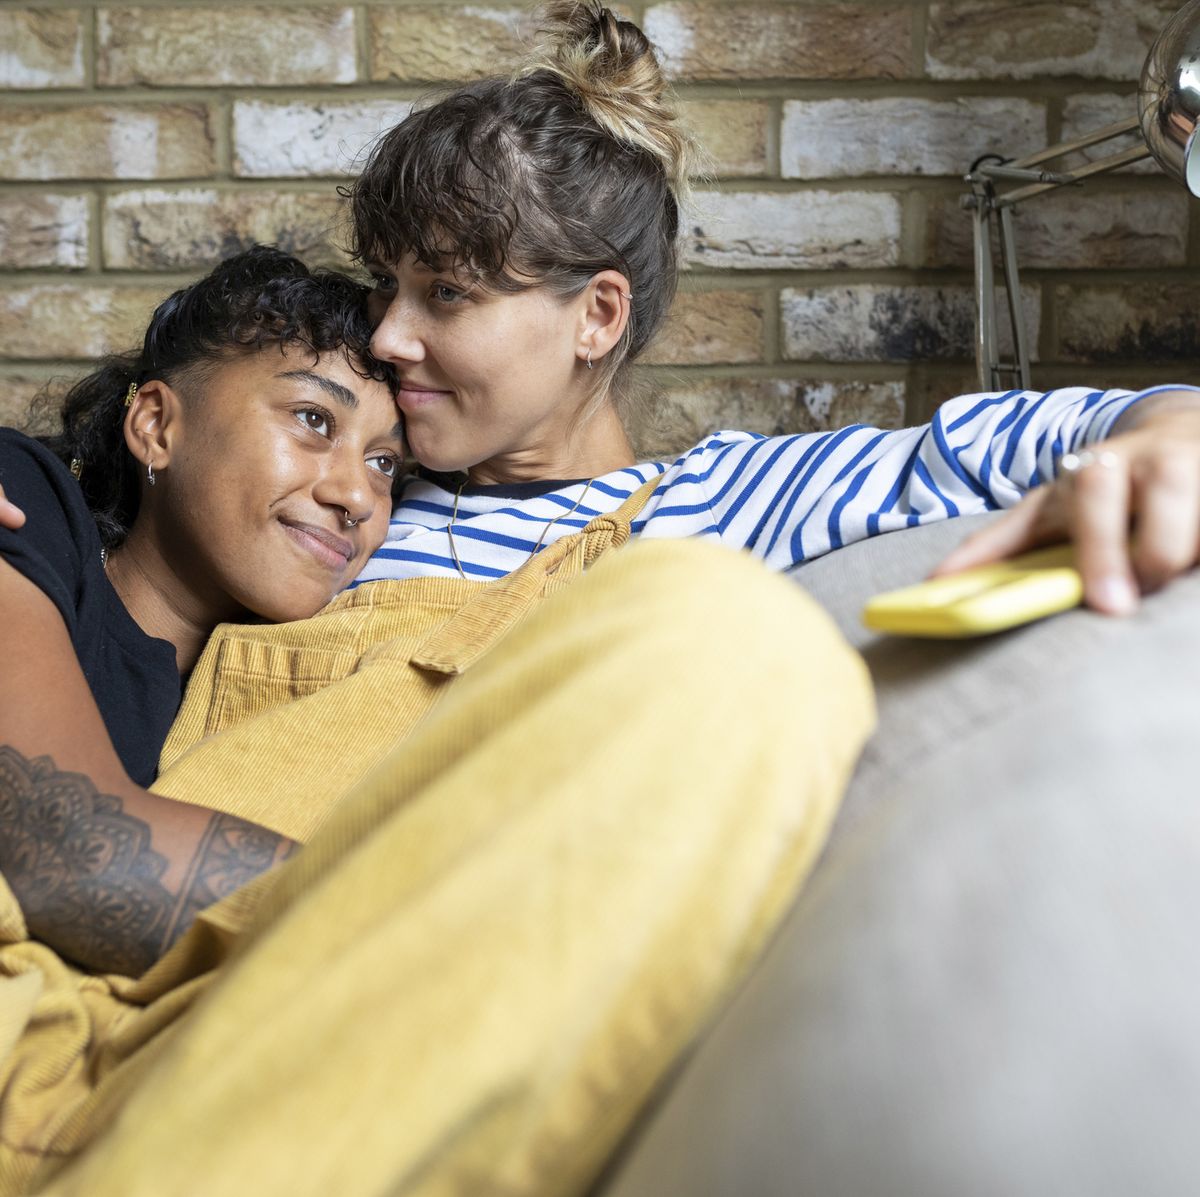 Straight Girls Try Lesbian Sex - Am I a lesbian? How to know if you're a lesbian